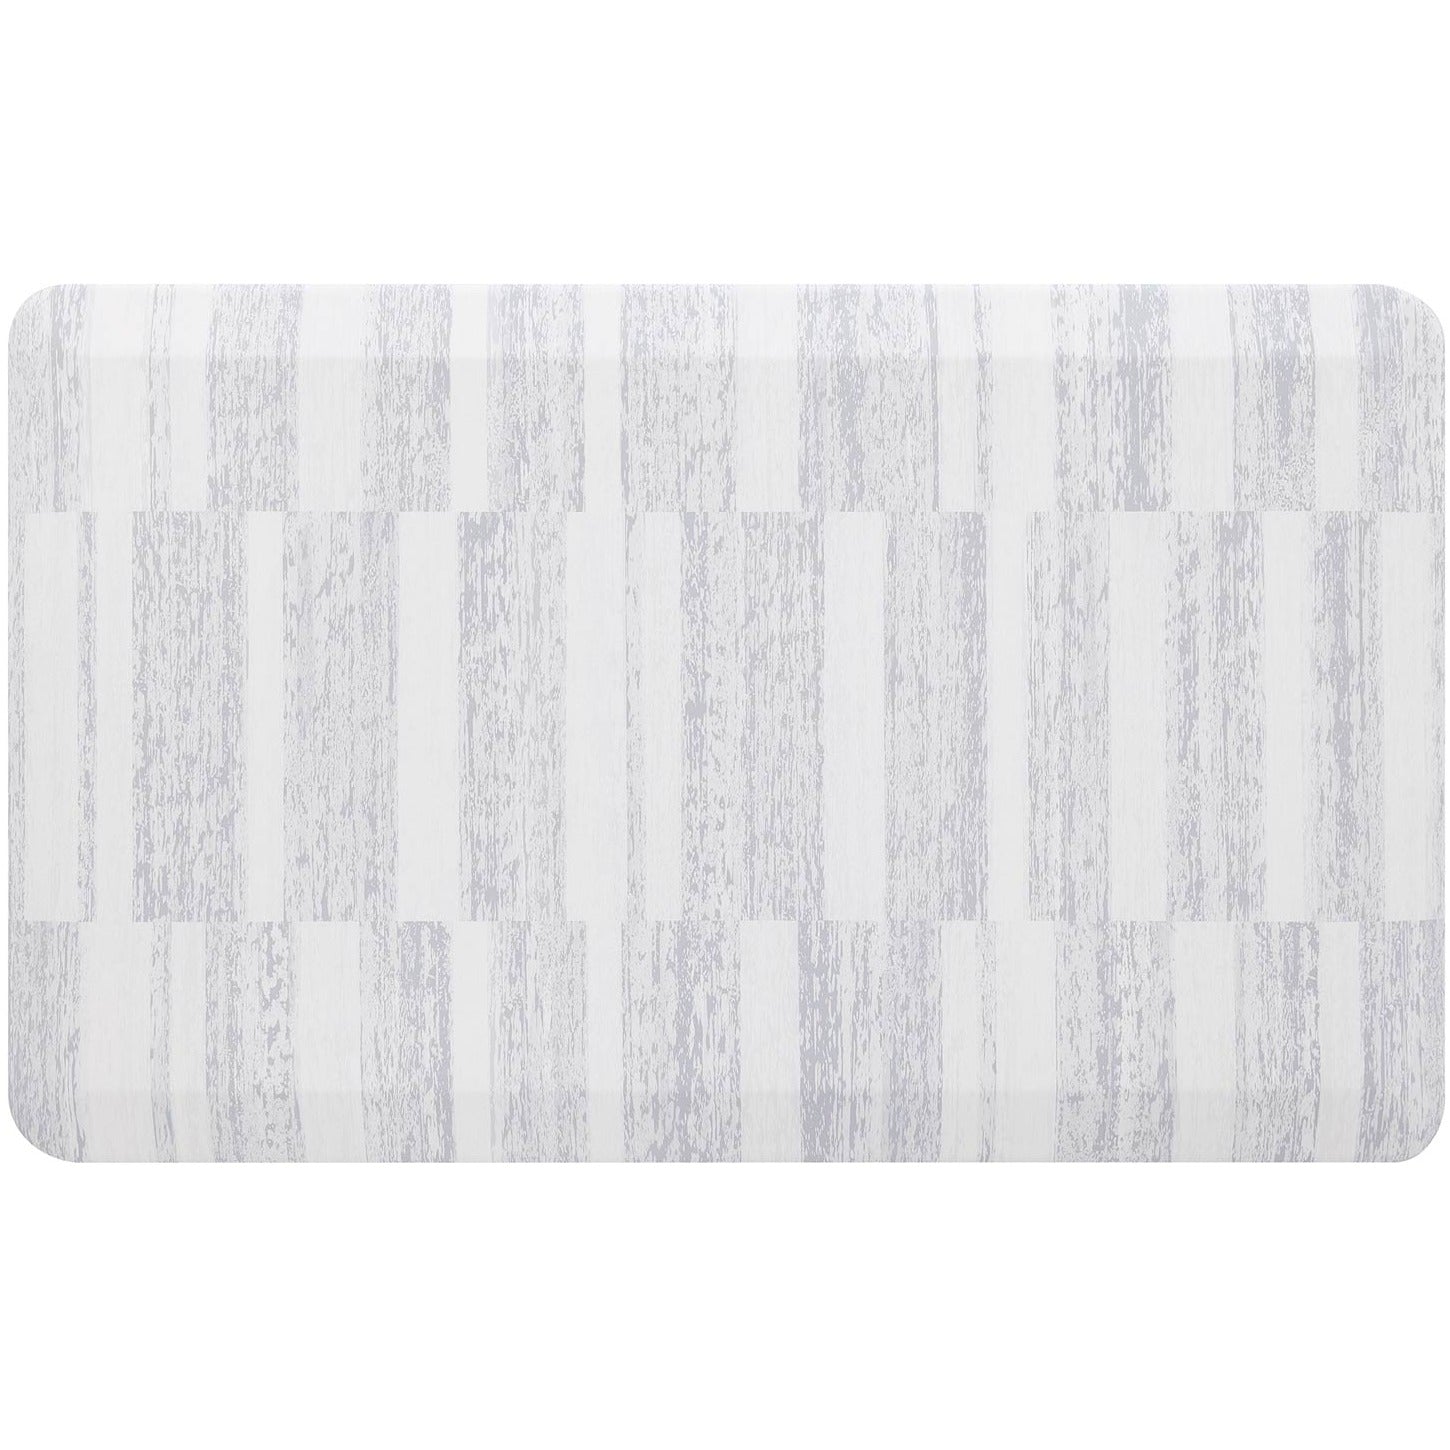 Overhead image of sutton stripe heather gray and white inverted stripe standing mat shown in size 22x36